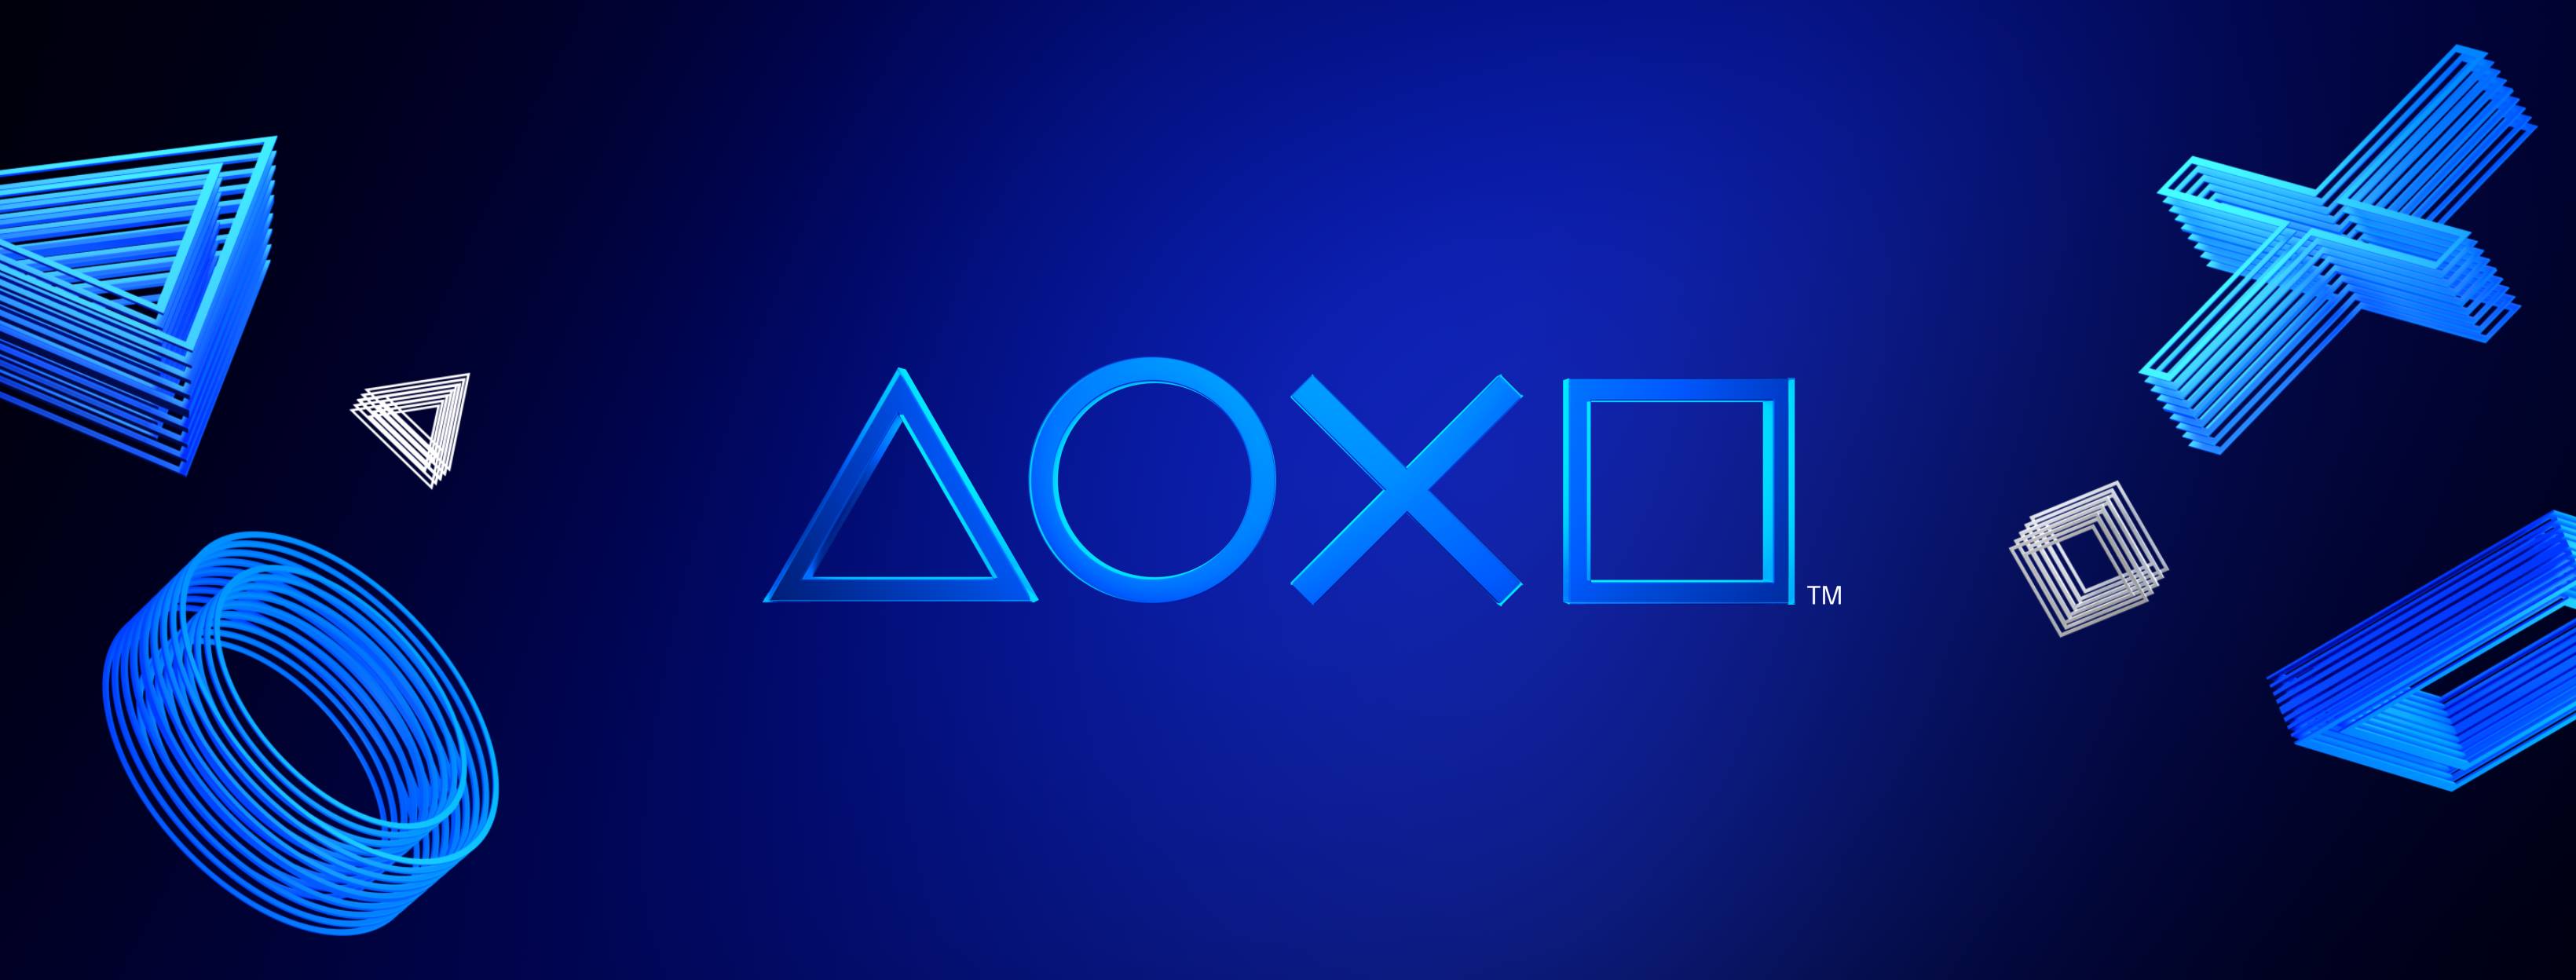 Get Ready: PlayStation Showcase Returns with a Bang, Here's What to Expect  - Softonic